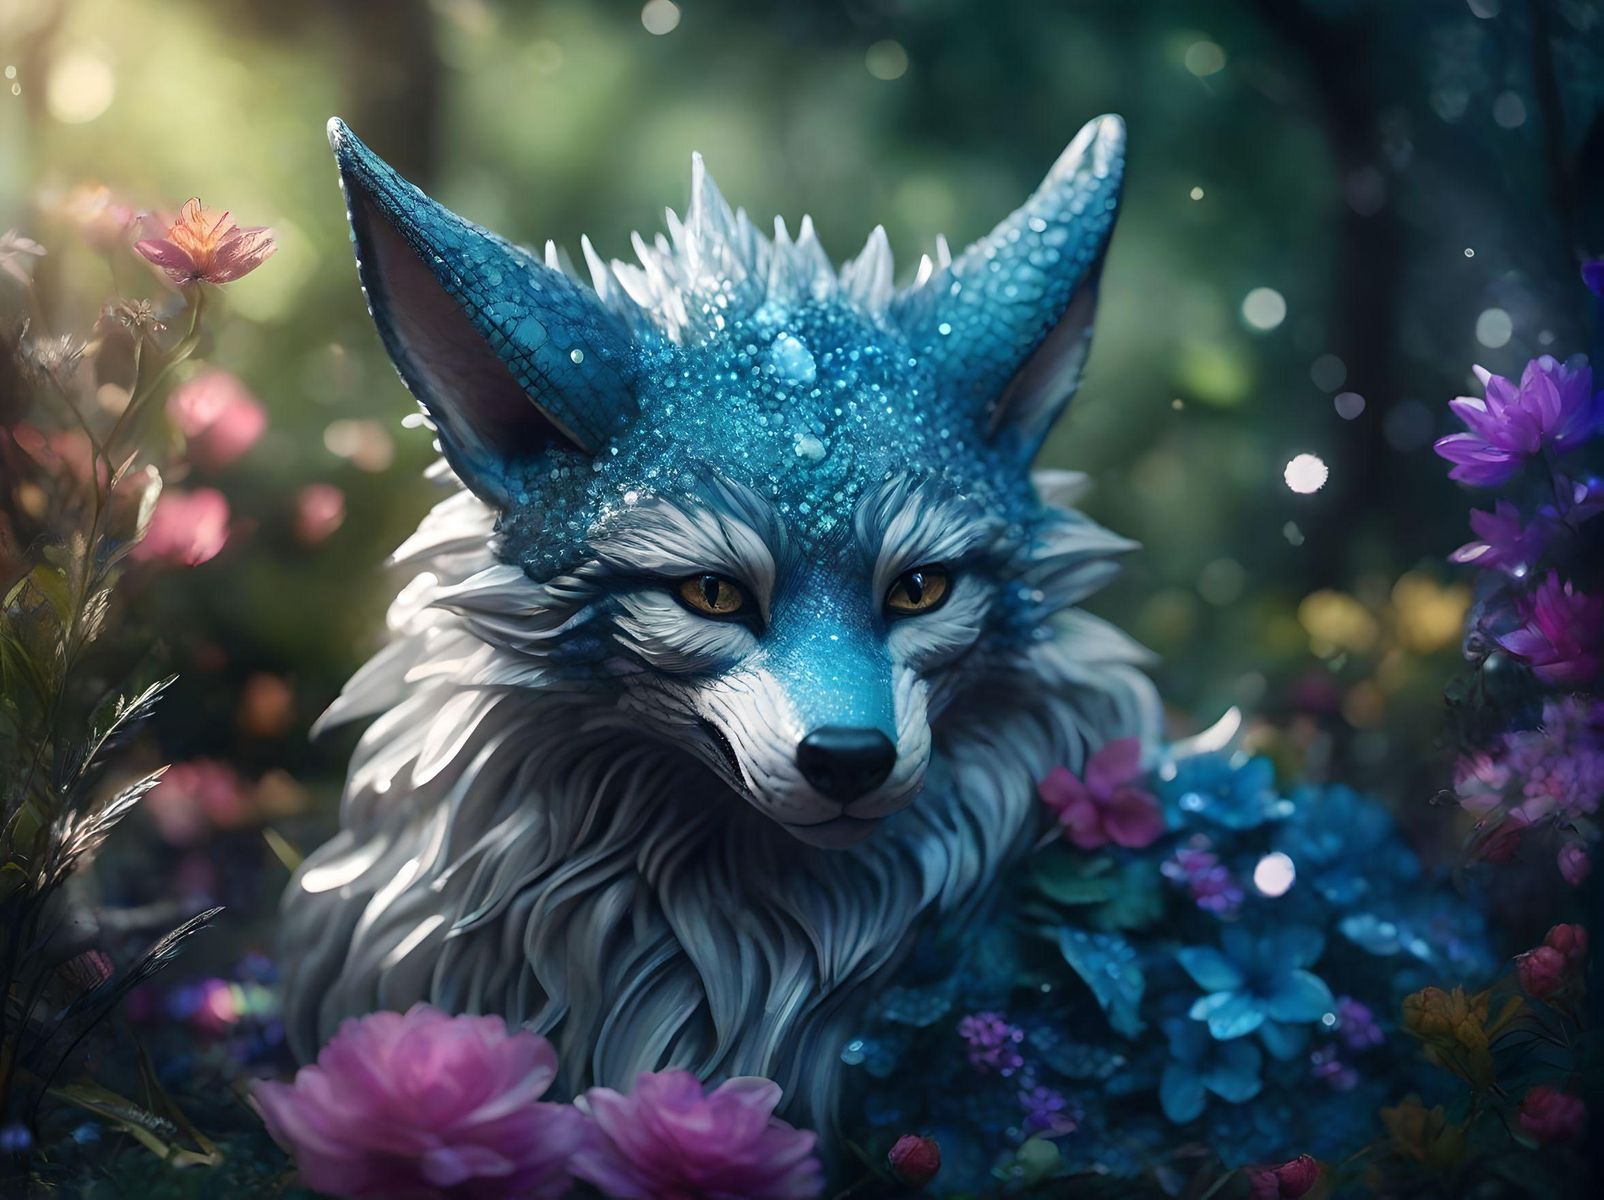 Dragon fox creature, blue and silver tones, wry smile, sparkly, sparkling, sitting on the forest floor surrounded by muted colorful flowers, photorealistic, intricate details, high definition, everything sparkles.